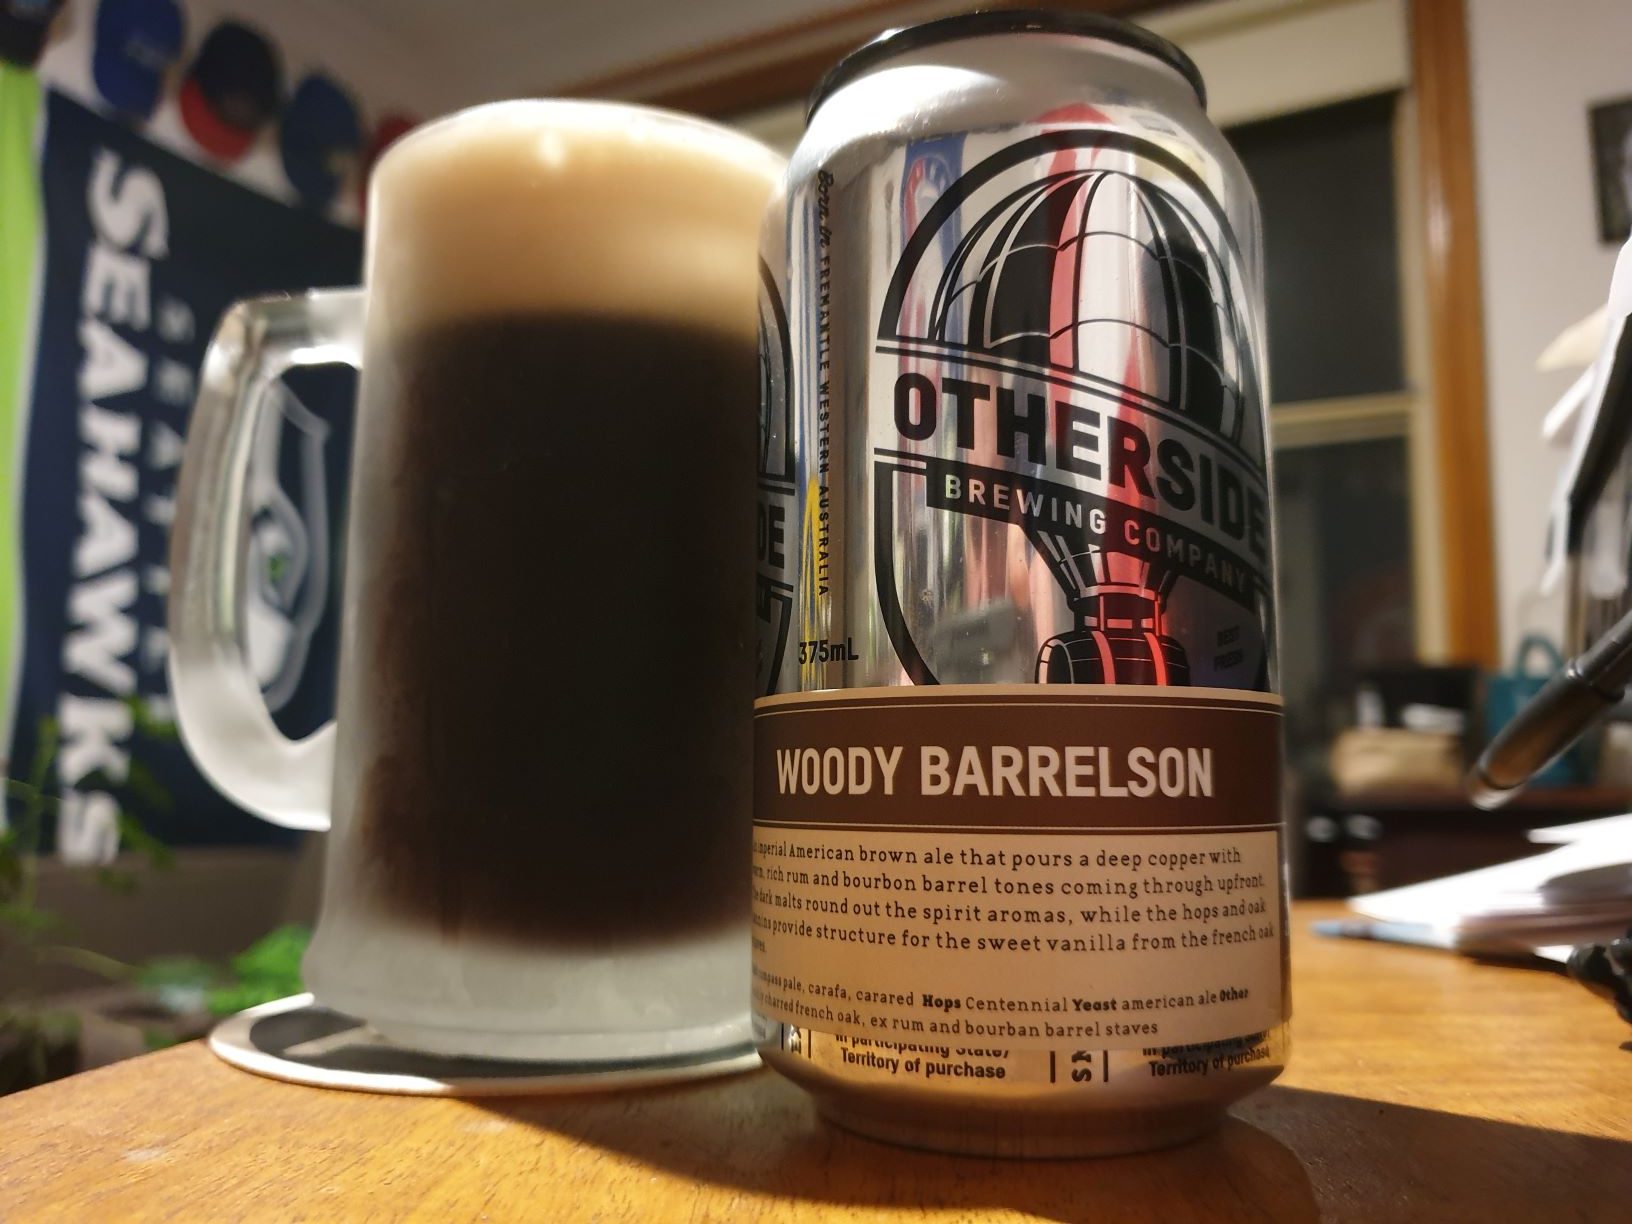 Woody Barrelson Imperial American Brown Ale by Otherside Brewing